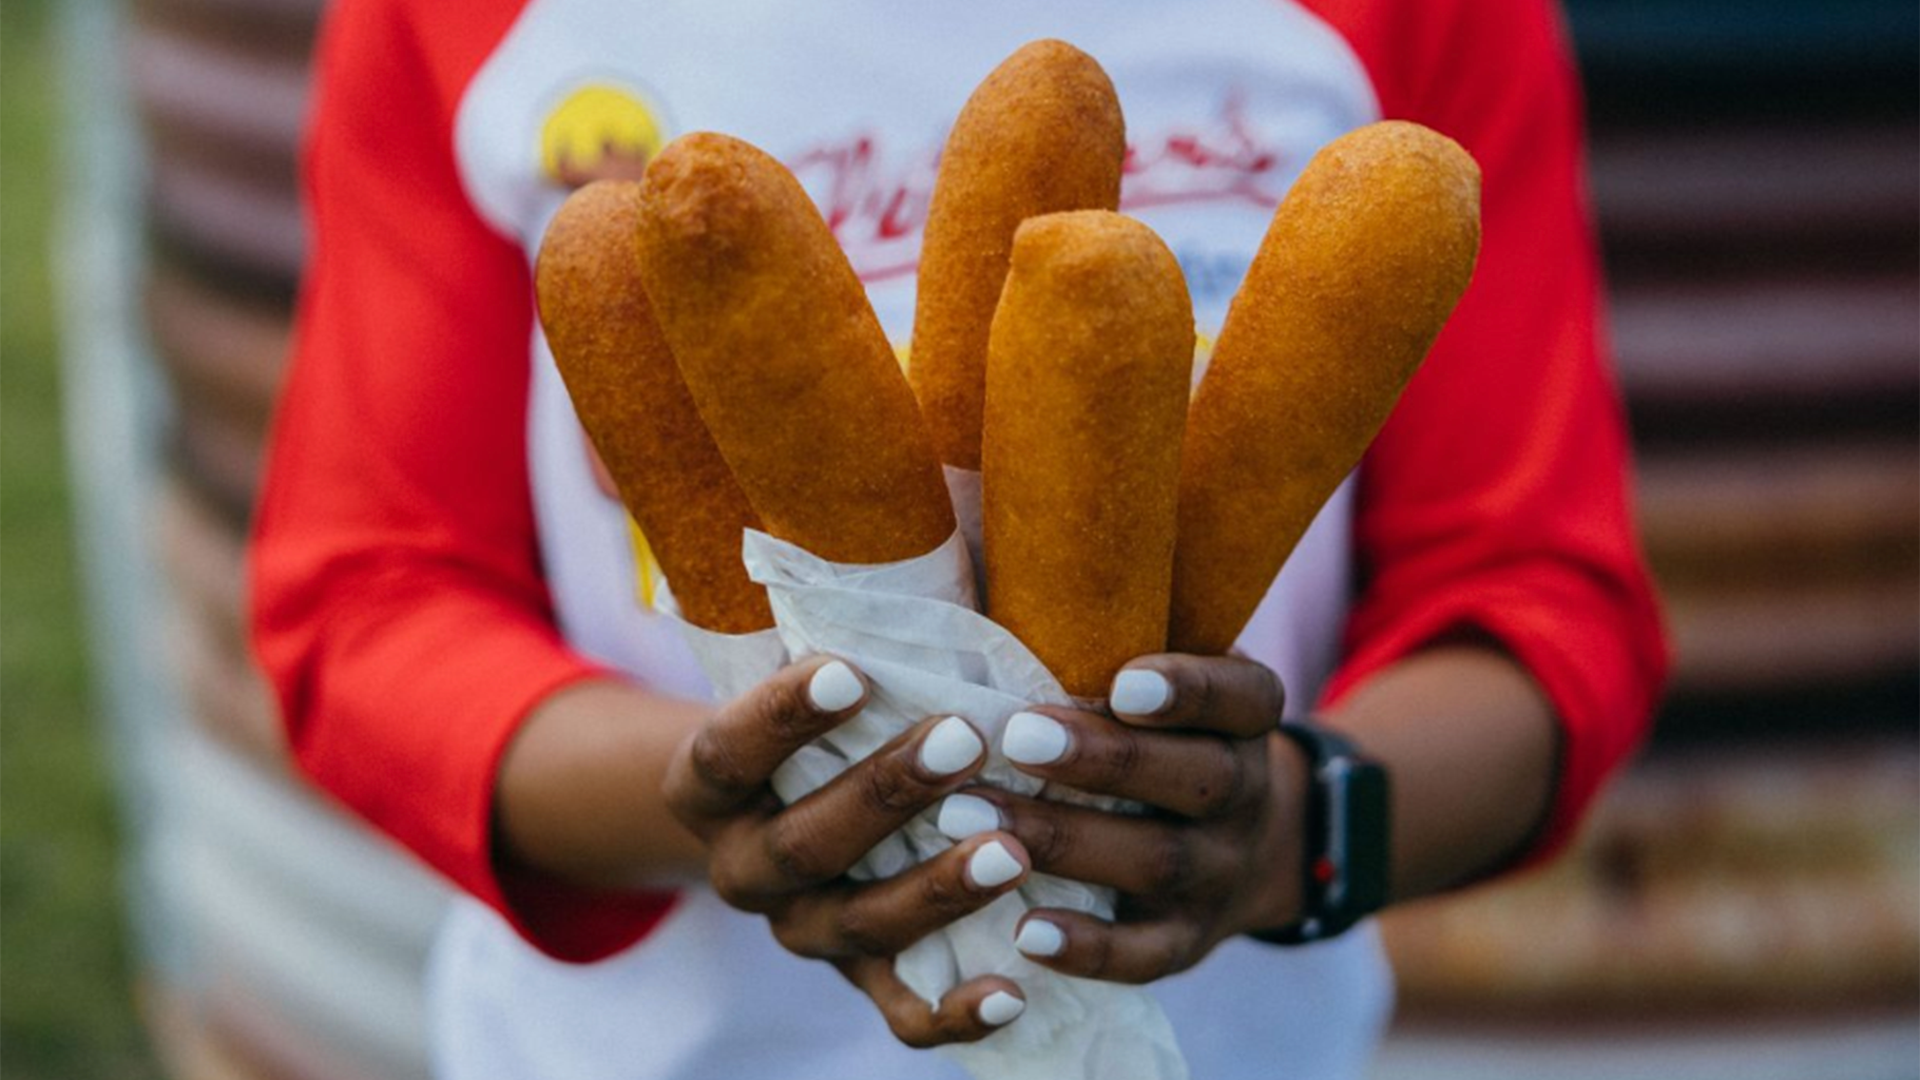 a person holds a bundle of corn dogs